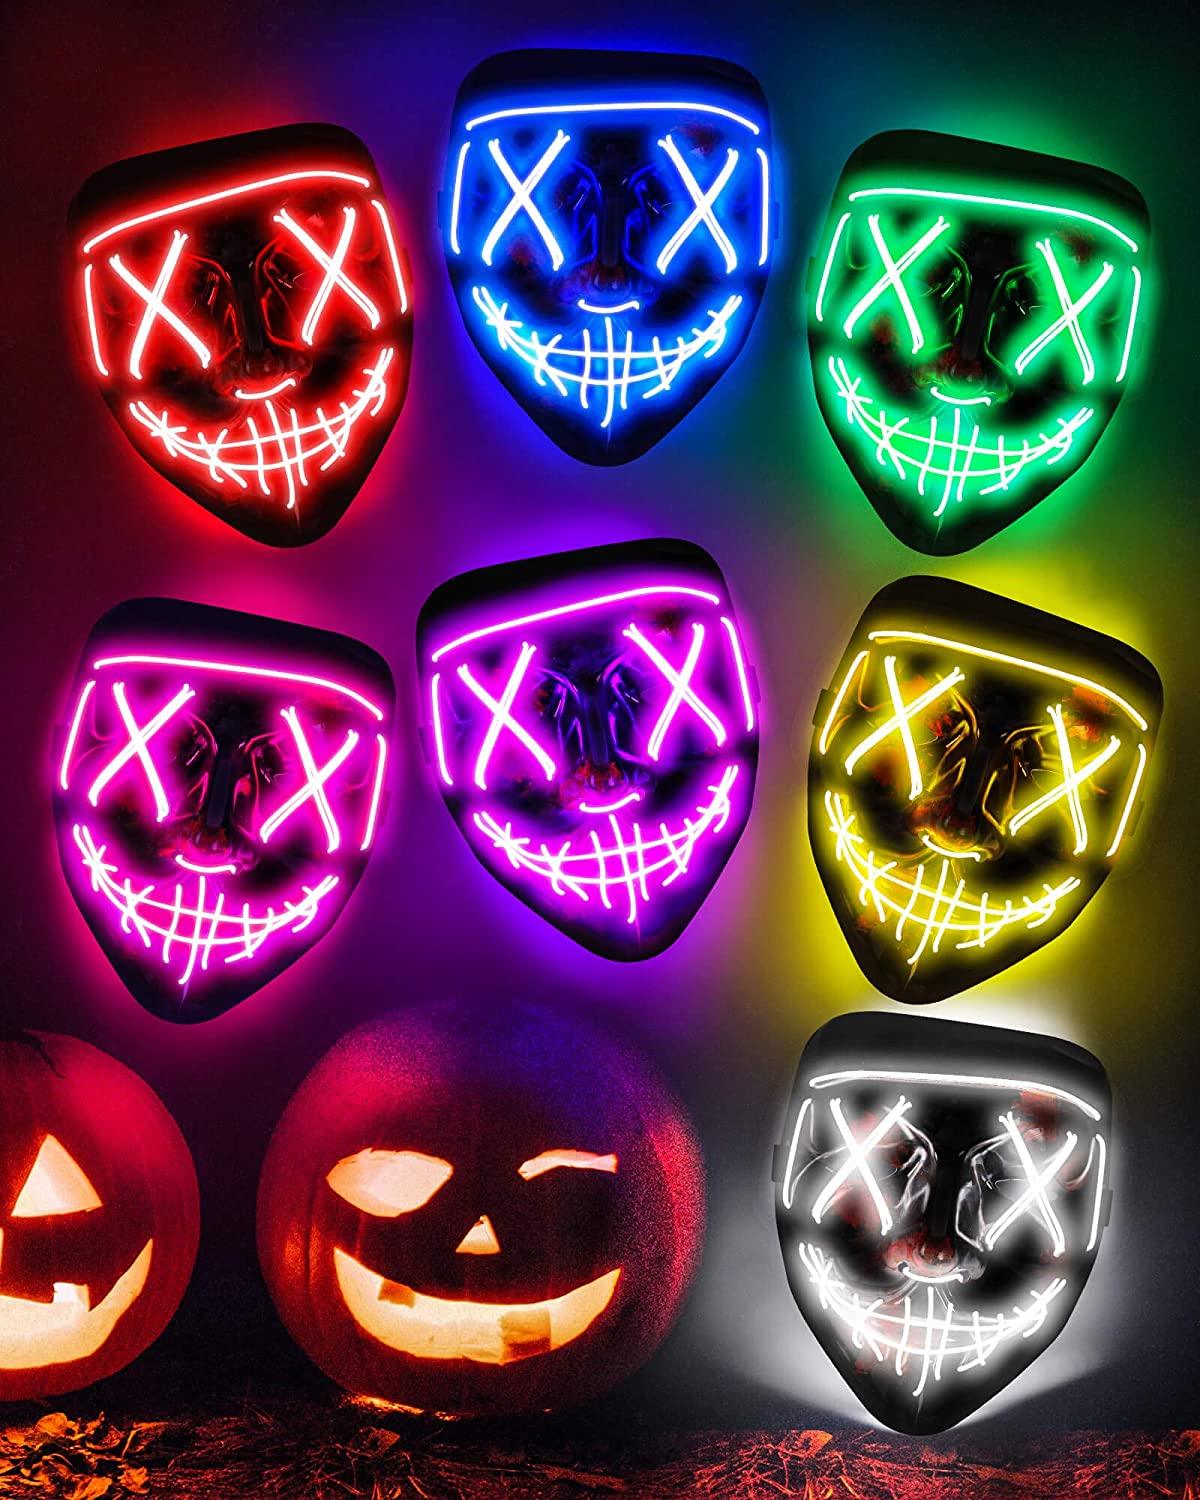 Scary Halloween Disguise, LED Light up DisguiseMask Cosplay, Glowing in The Dark Disguise Costume - If you say i do